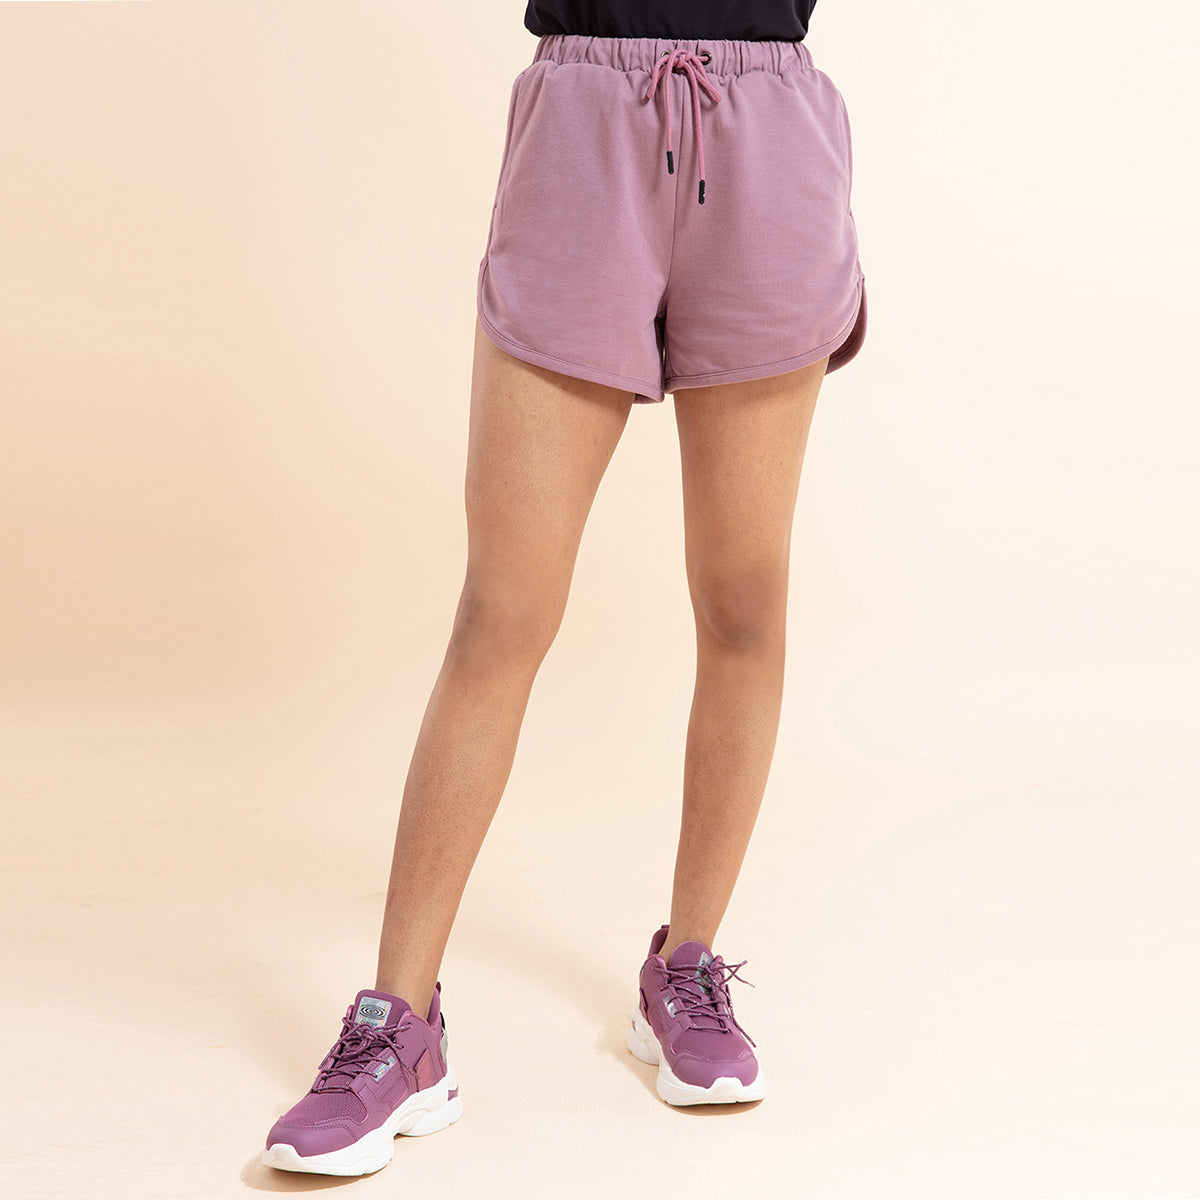 Chill- Pill Cotton Terry Shorts , Nykd All Day-NYK 039 Elderberry